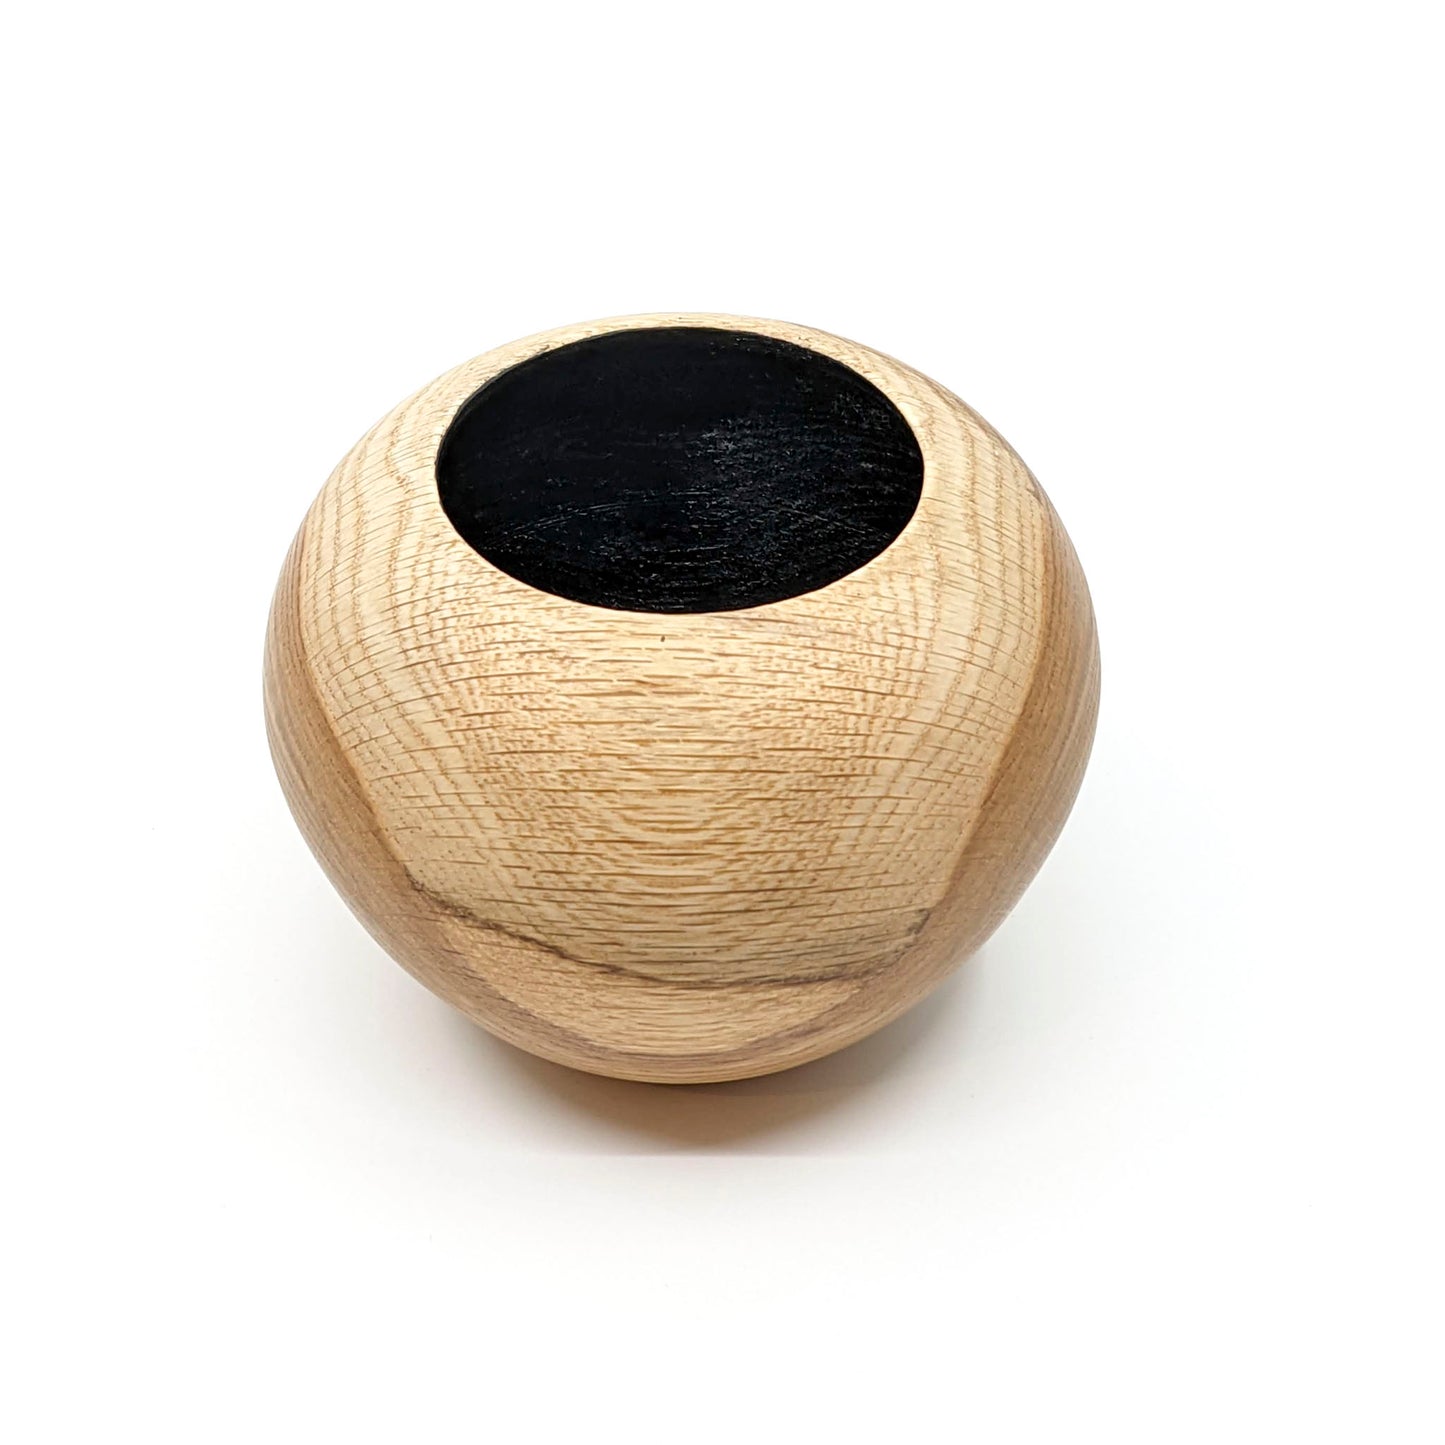 Oak Vessel with Black Stained Interior